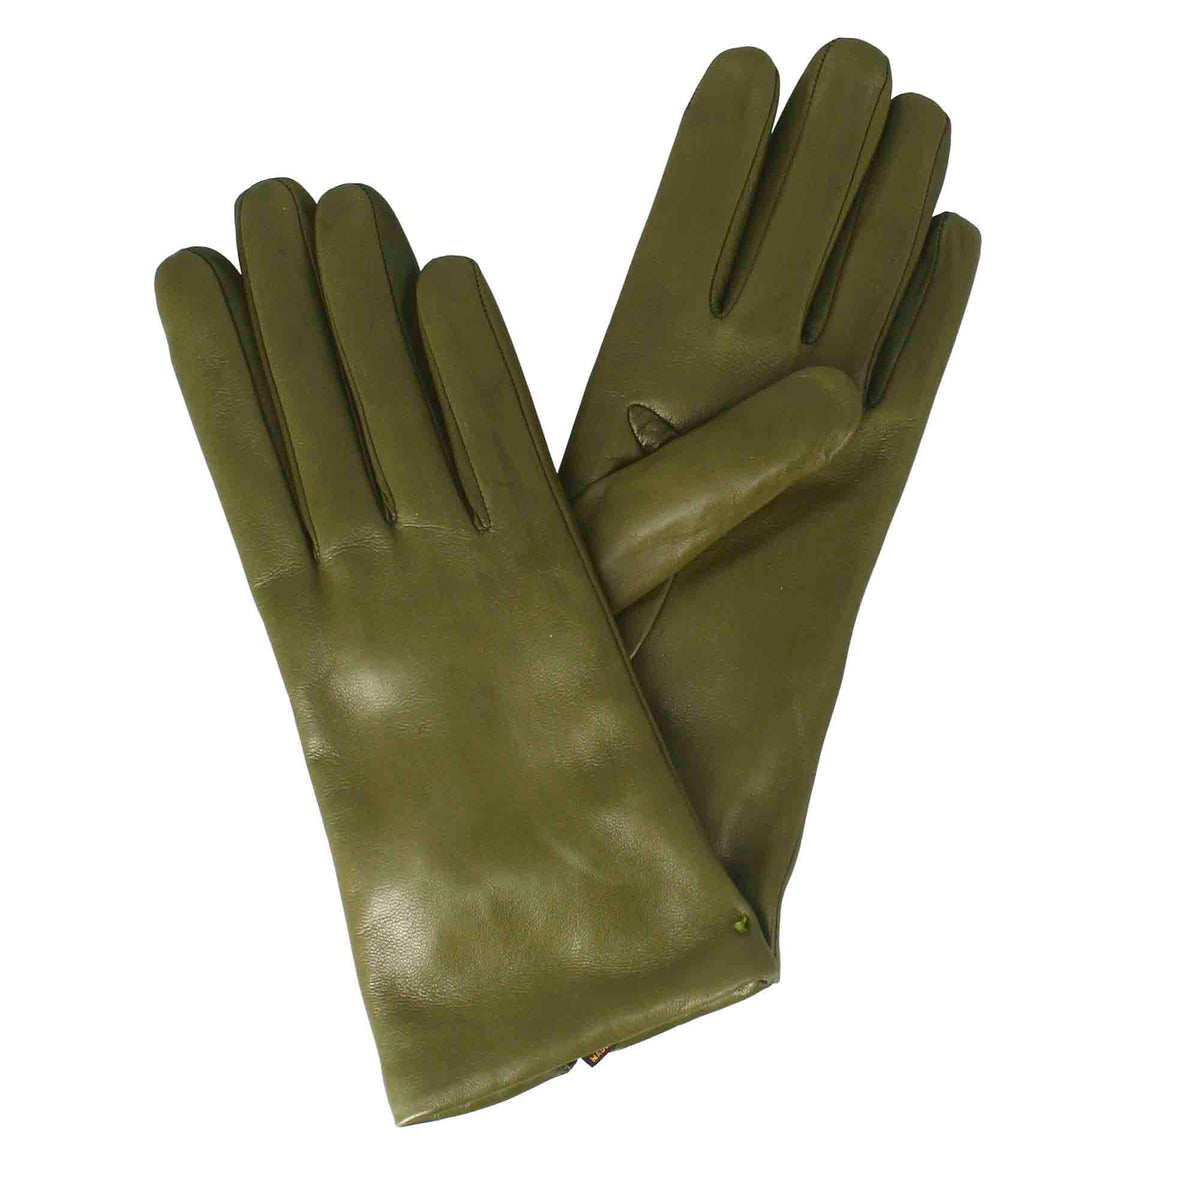 Women's glove in smooth green leather with cashmere lining